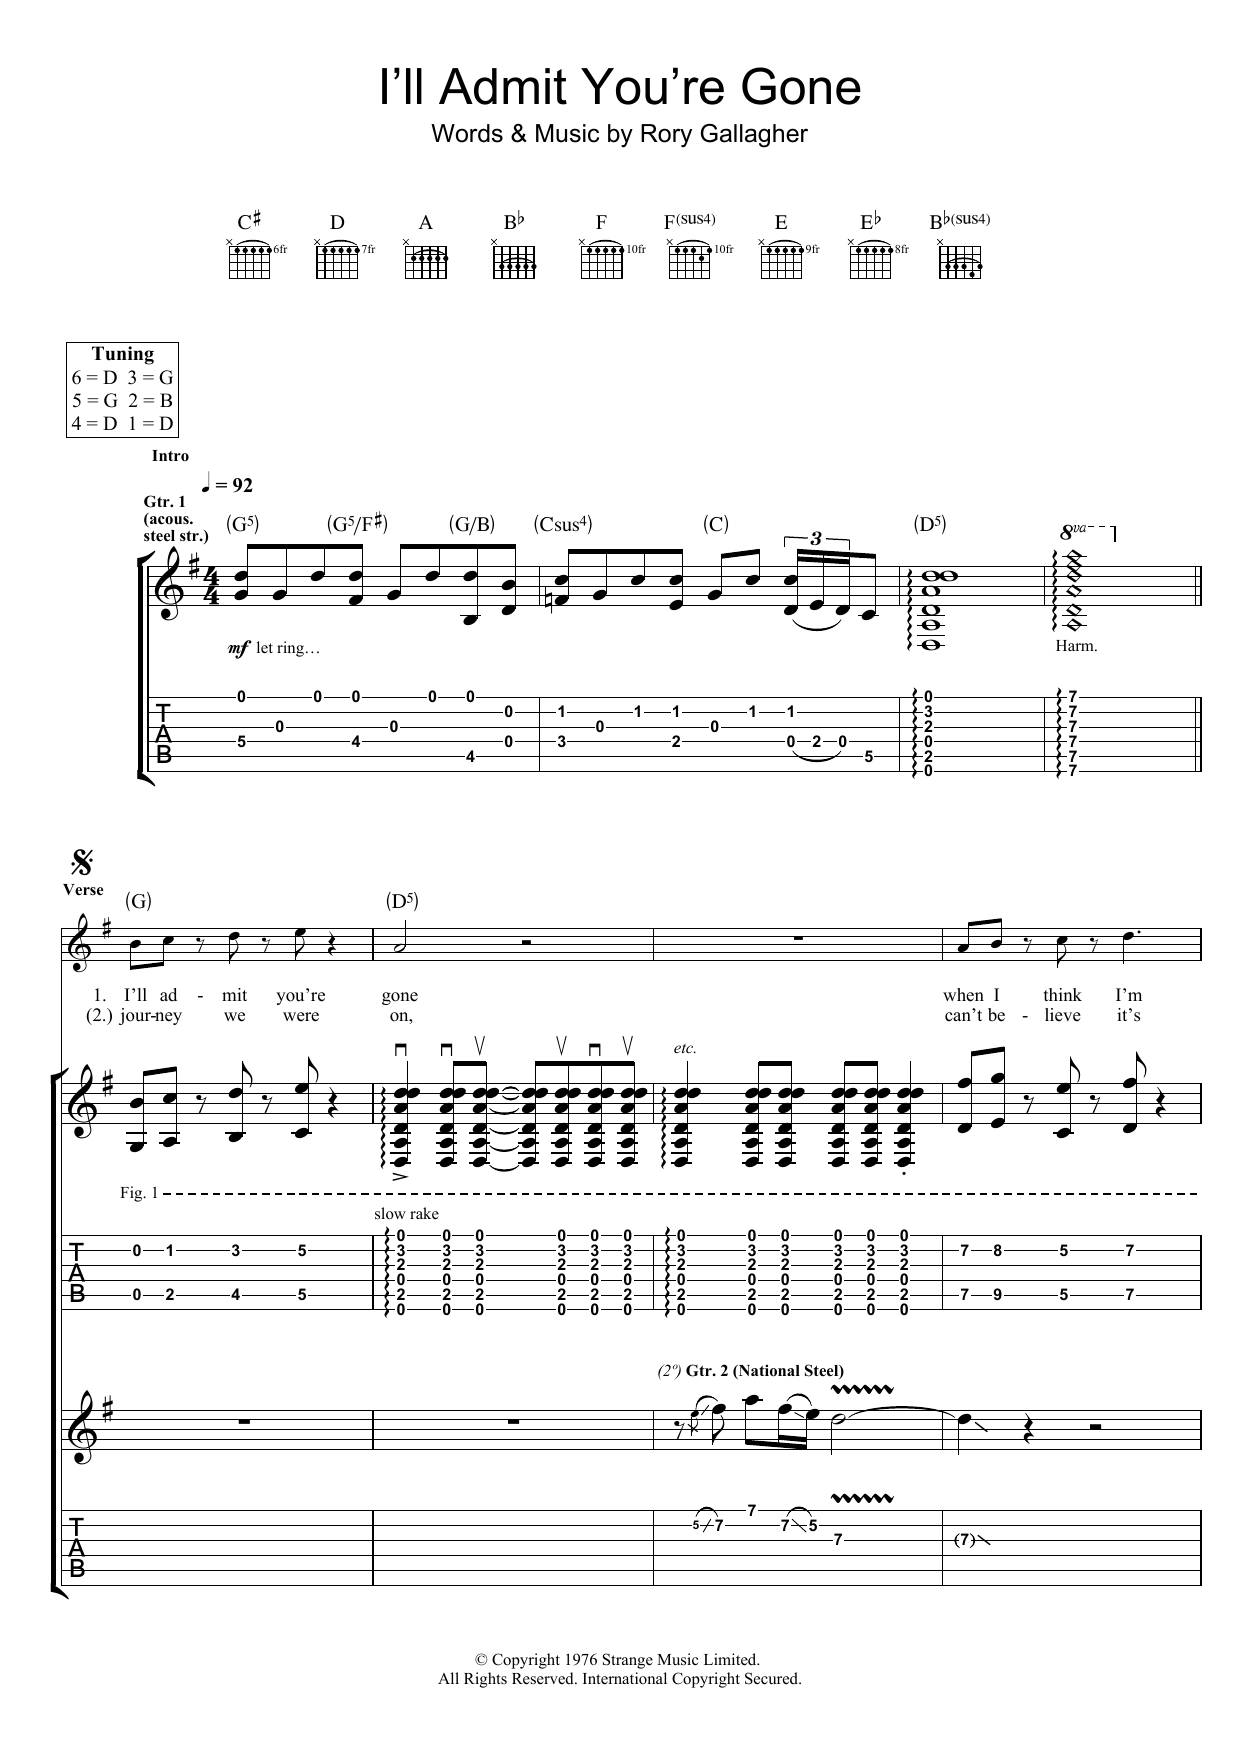 Download Rory Gallagher I'll Admit You're Gone Sheet Music